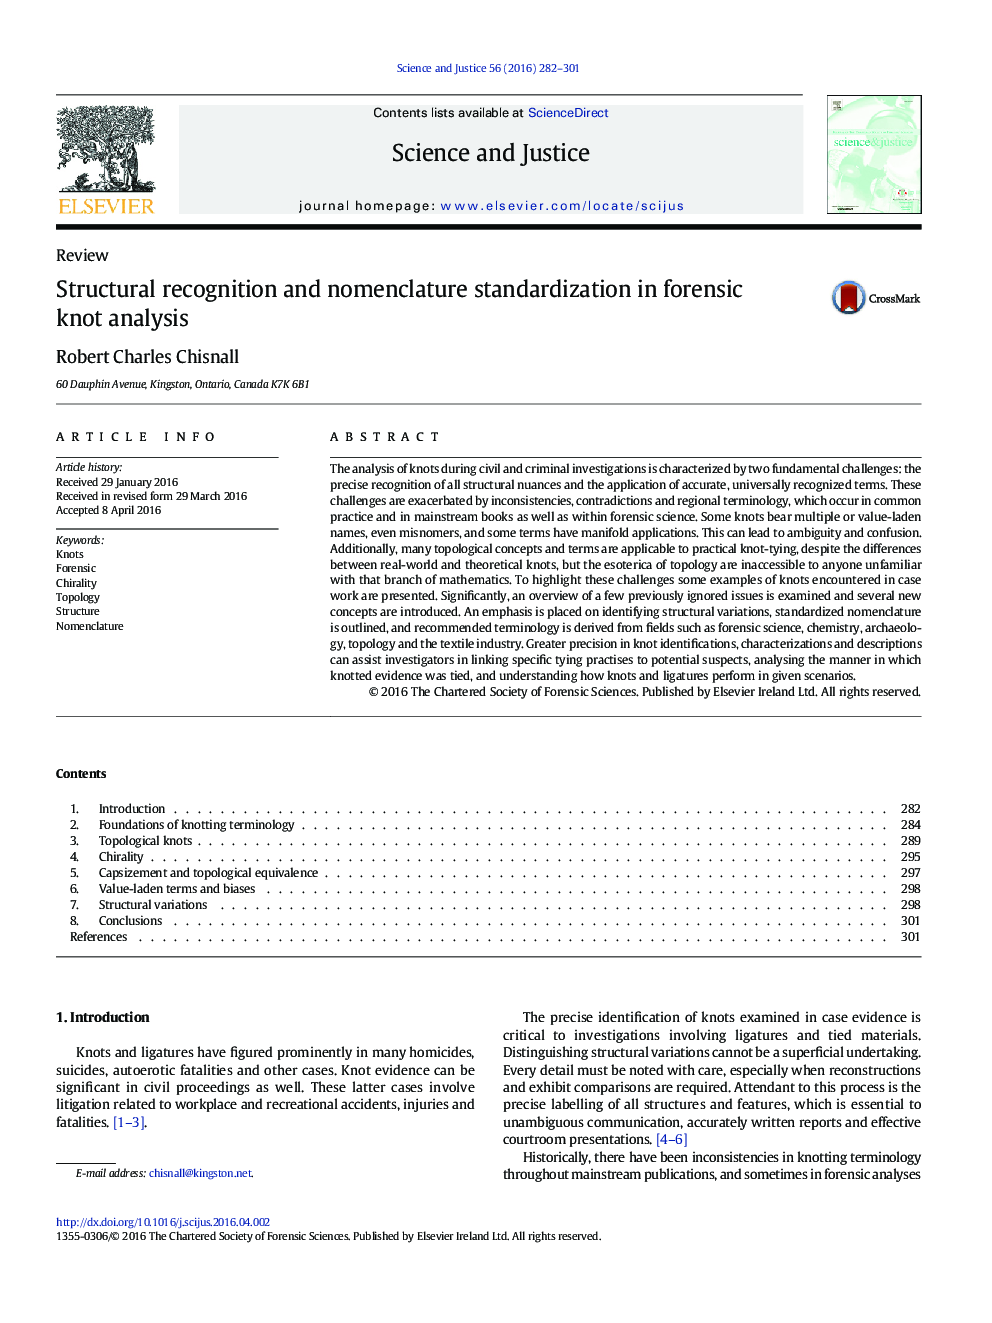 Structural recognition and nomenclature standardization in forensic knot analysis